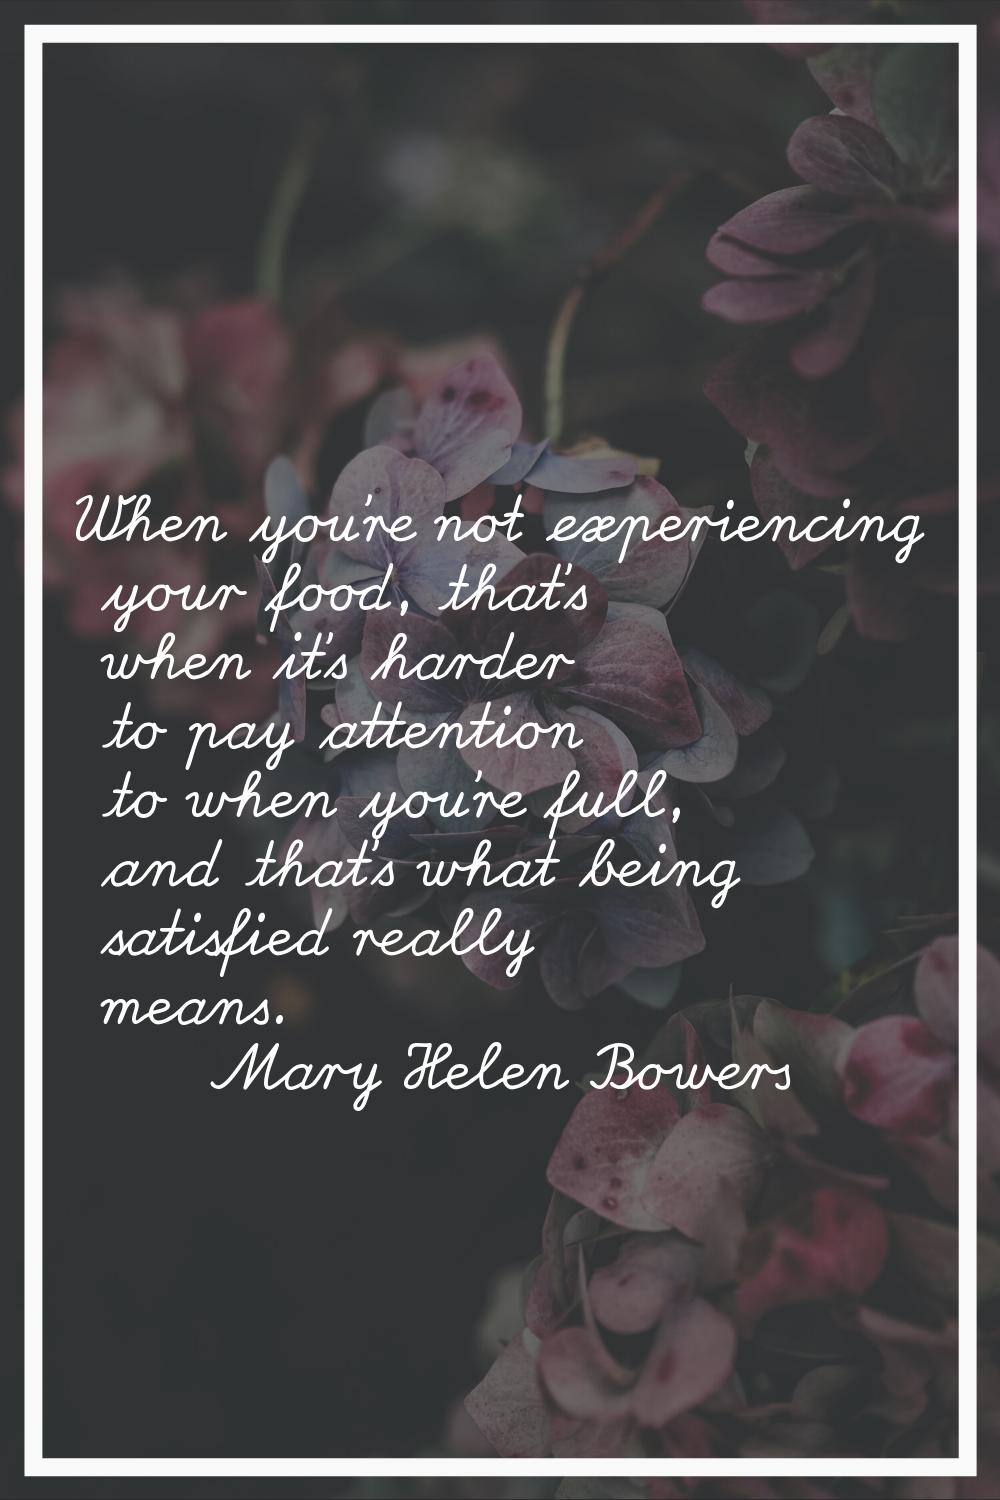 When you're not experiencing your food, that's when it's harder to pay attention to when you're ful